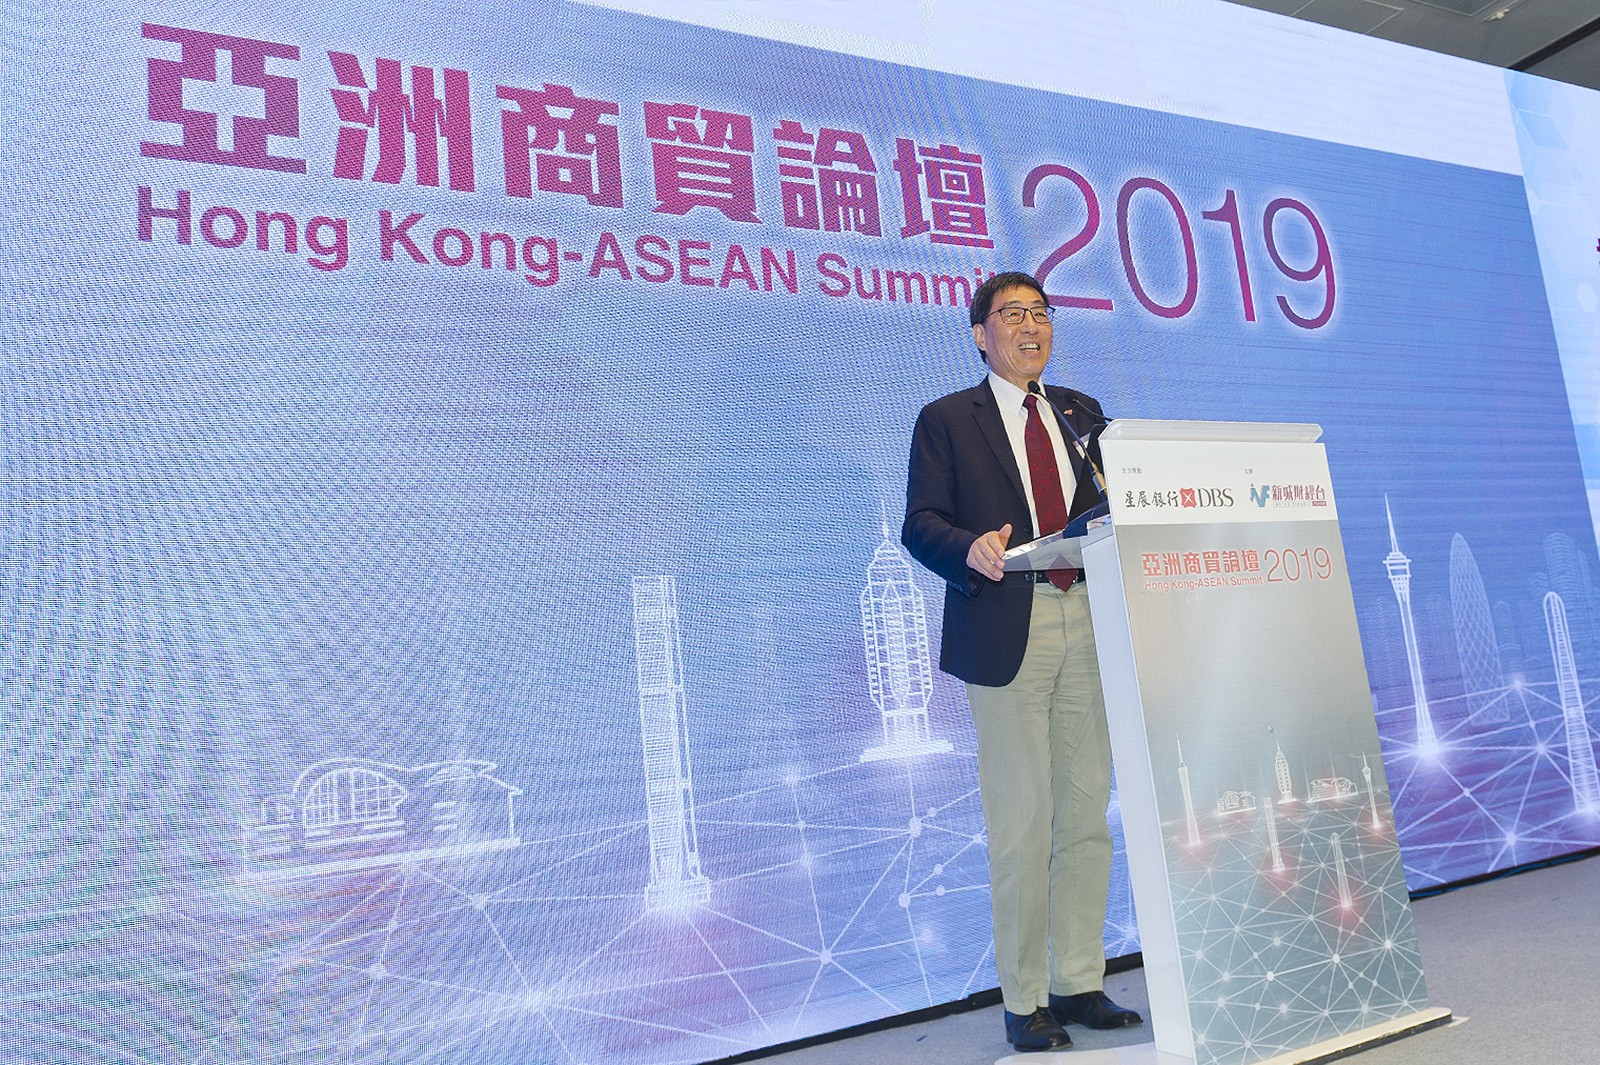 Professor Kuo delivered a keynote speech on &quot;How to promote the development of innovation and technology in Hong Kong” at the Hong Kong-ASEAN Summit 2019. The Summit was attended by some 200 distinguished members of the community, including the consuls general of Asian countries and other government guests, along with representatives from the business community.